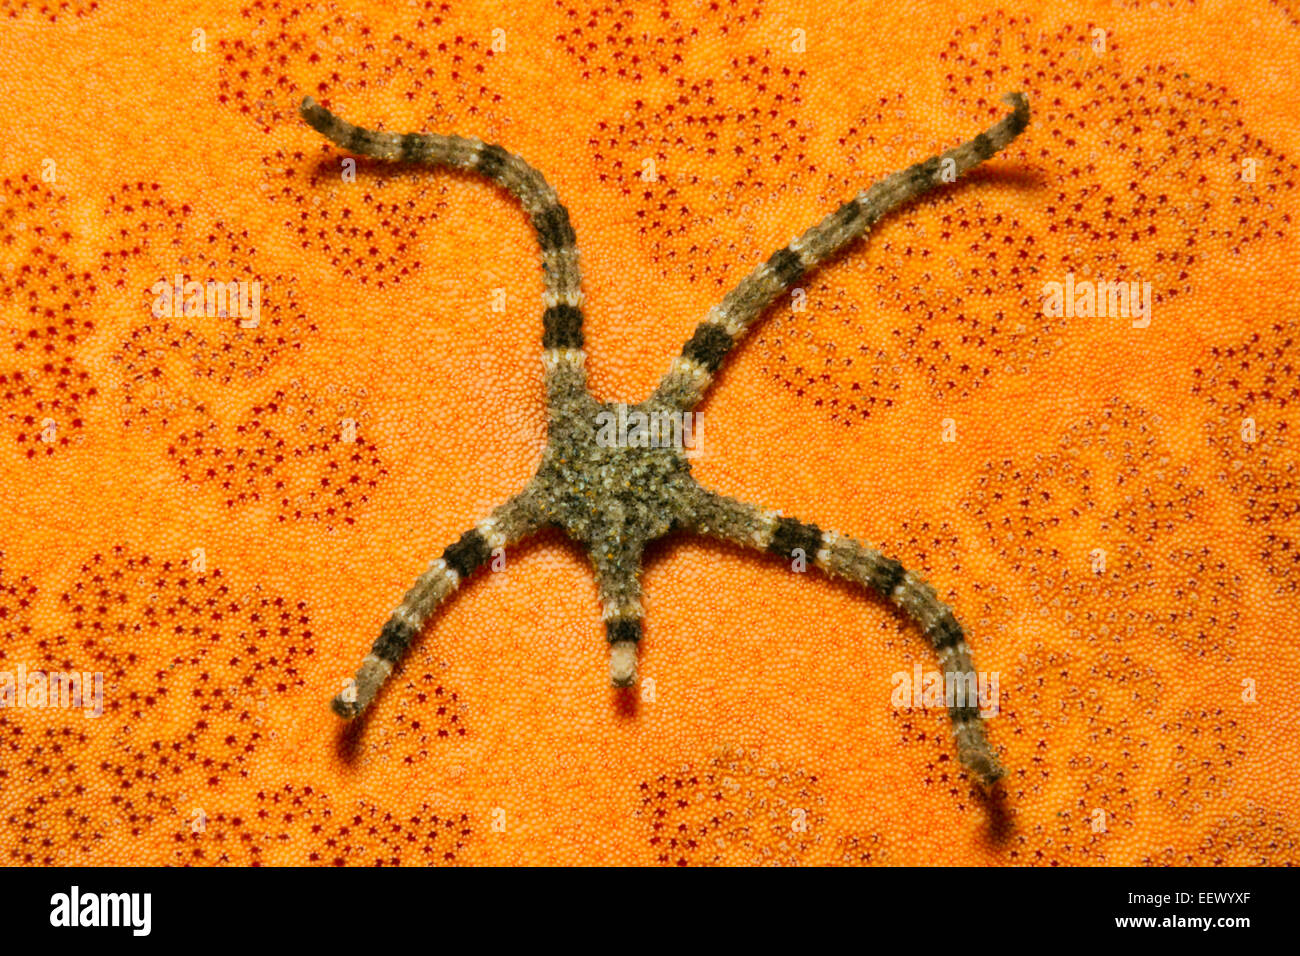 Brittle Star, Ophiothrix sp., Ambon, Moluccas, Indonesia Stock Photo